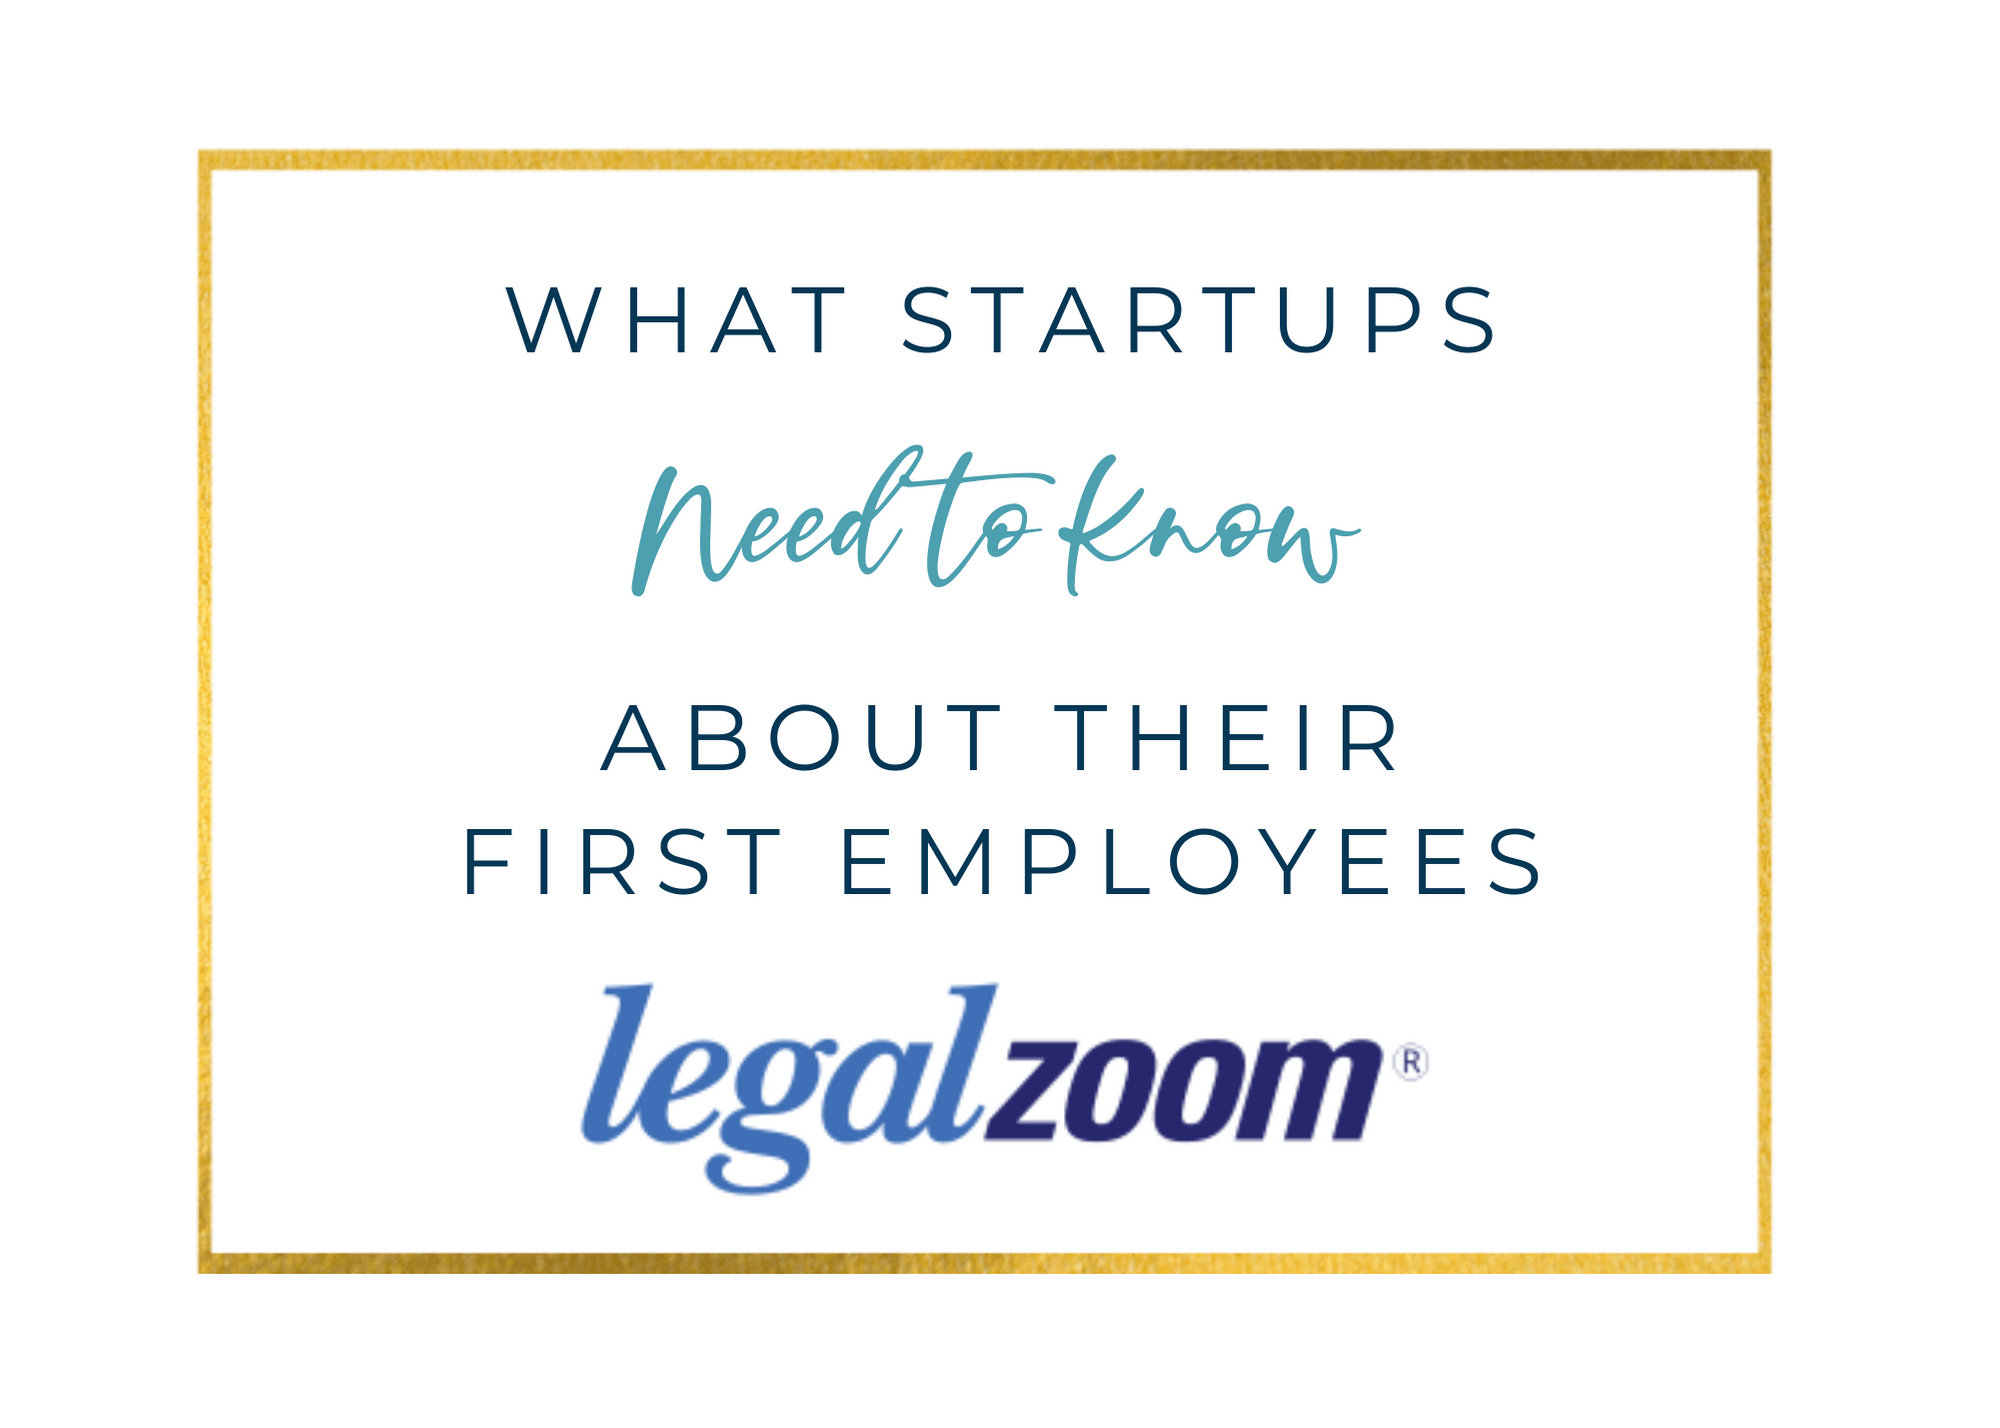 summit collaborations legal zoom What Startups Need to Know about Their First Employees